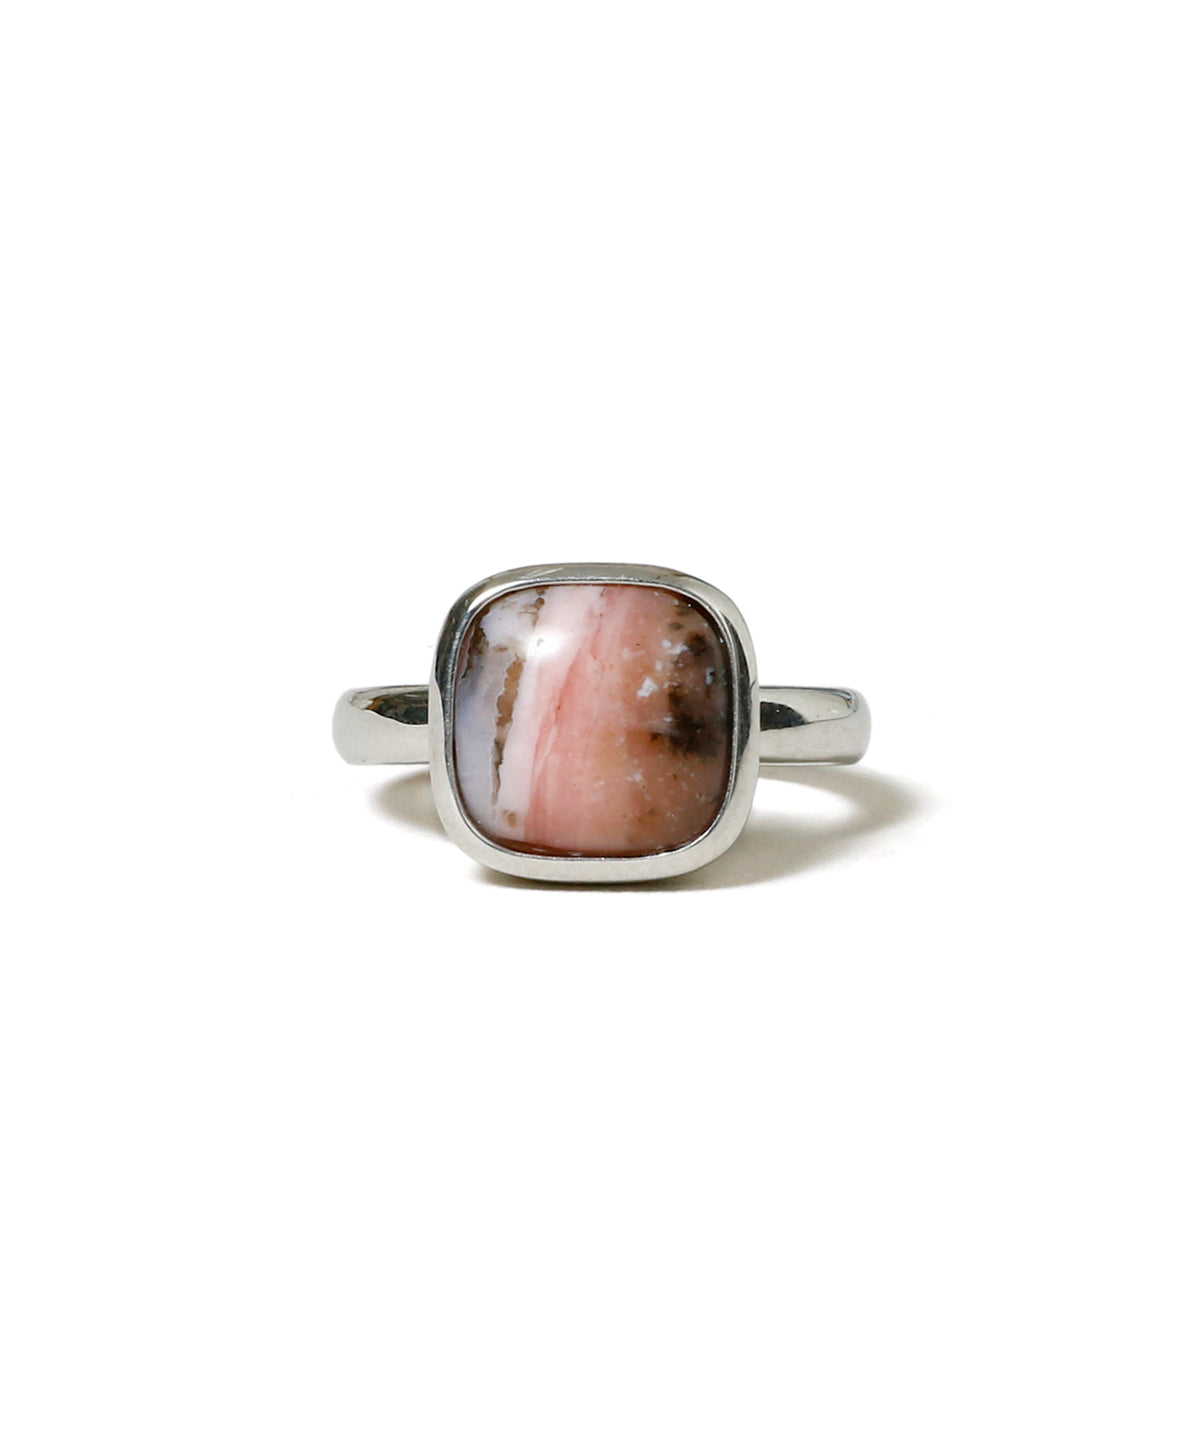 Square Cabochon Pink Opal Stone Ring